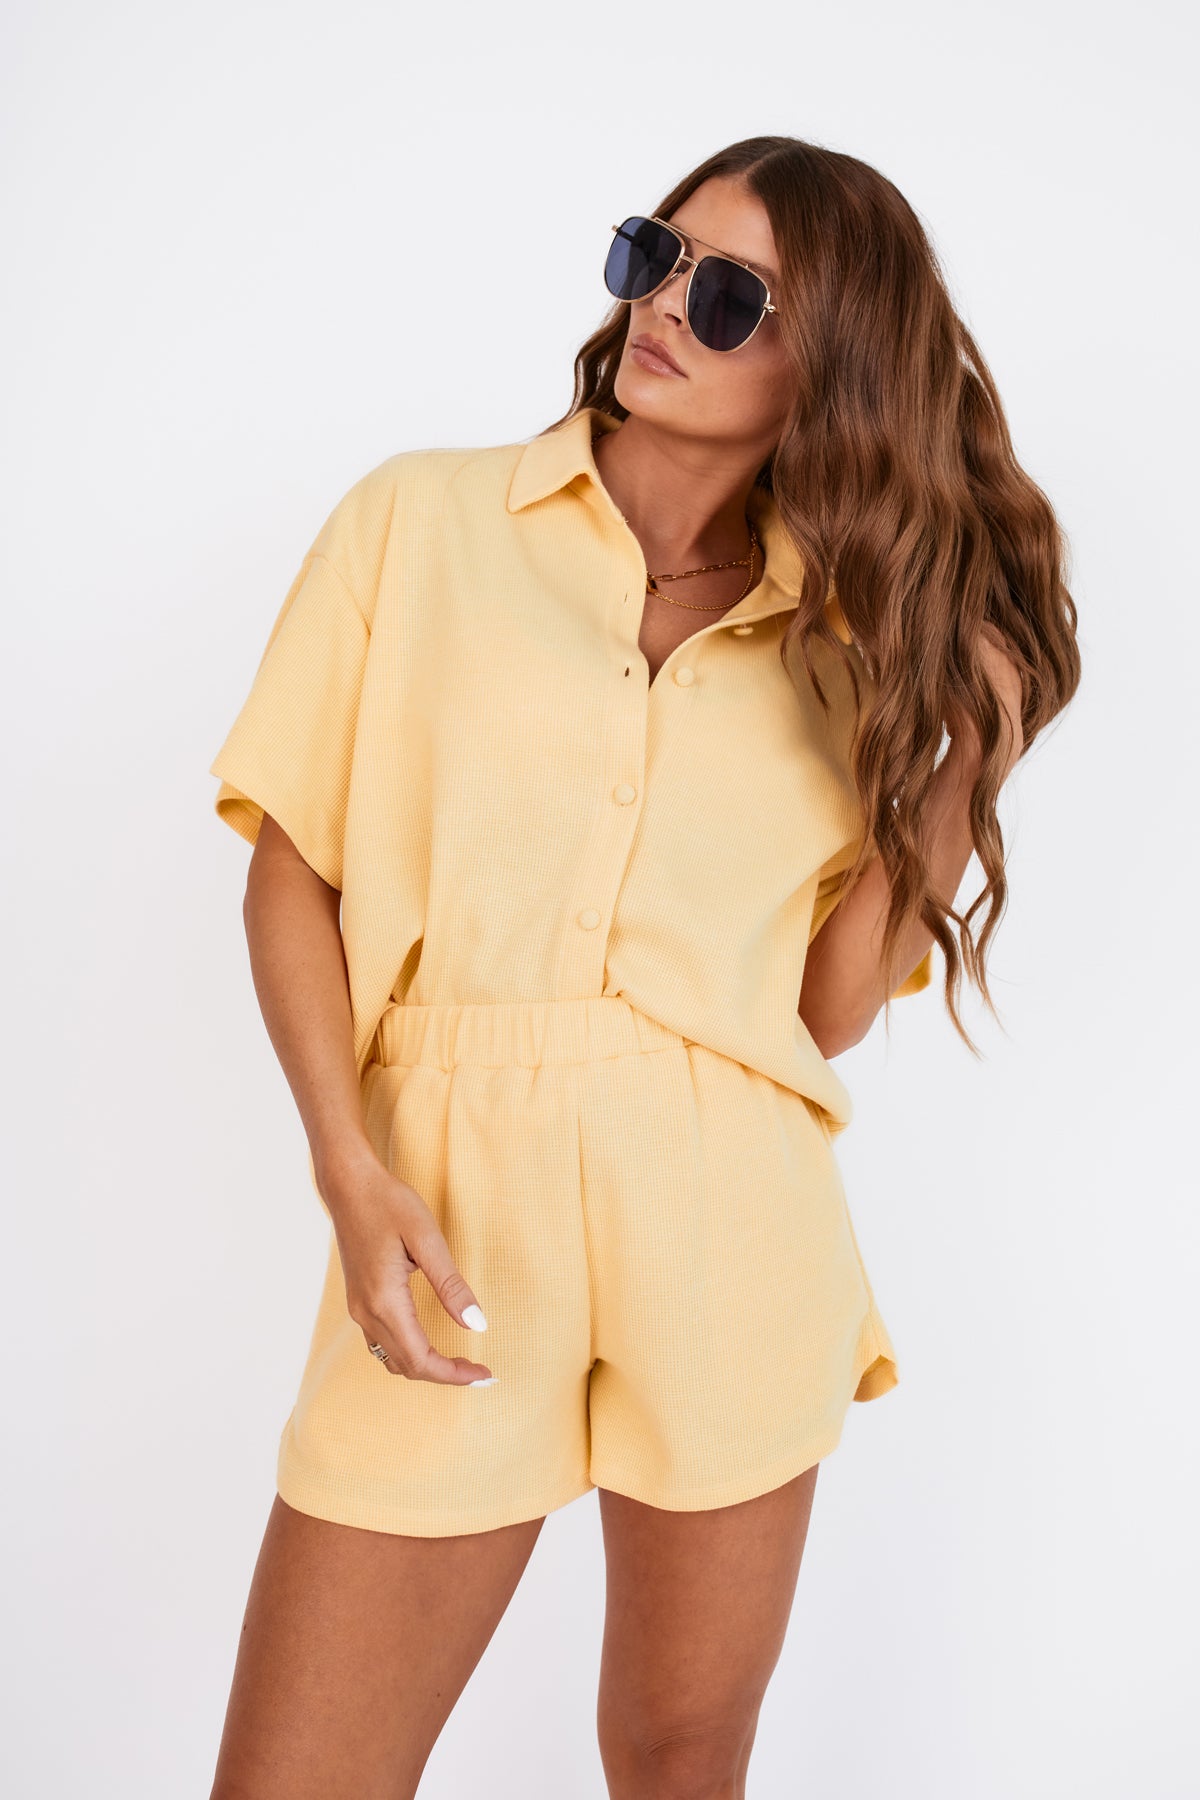 CHASING RAYS YELLOW BUTTON DOWN